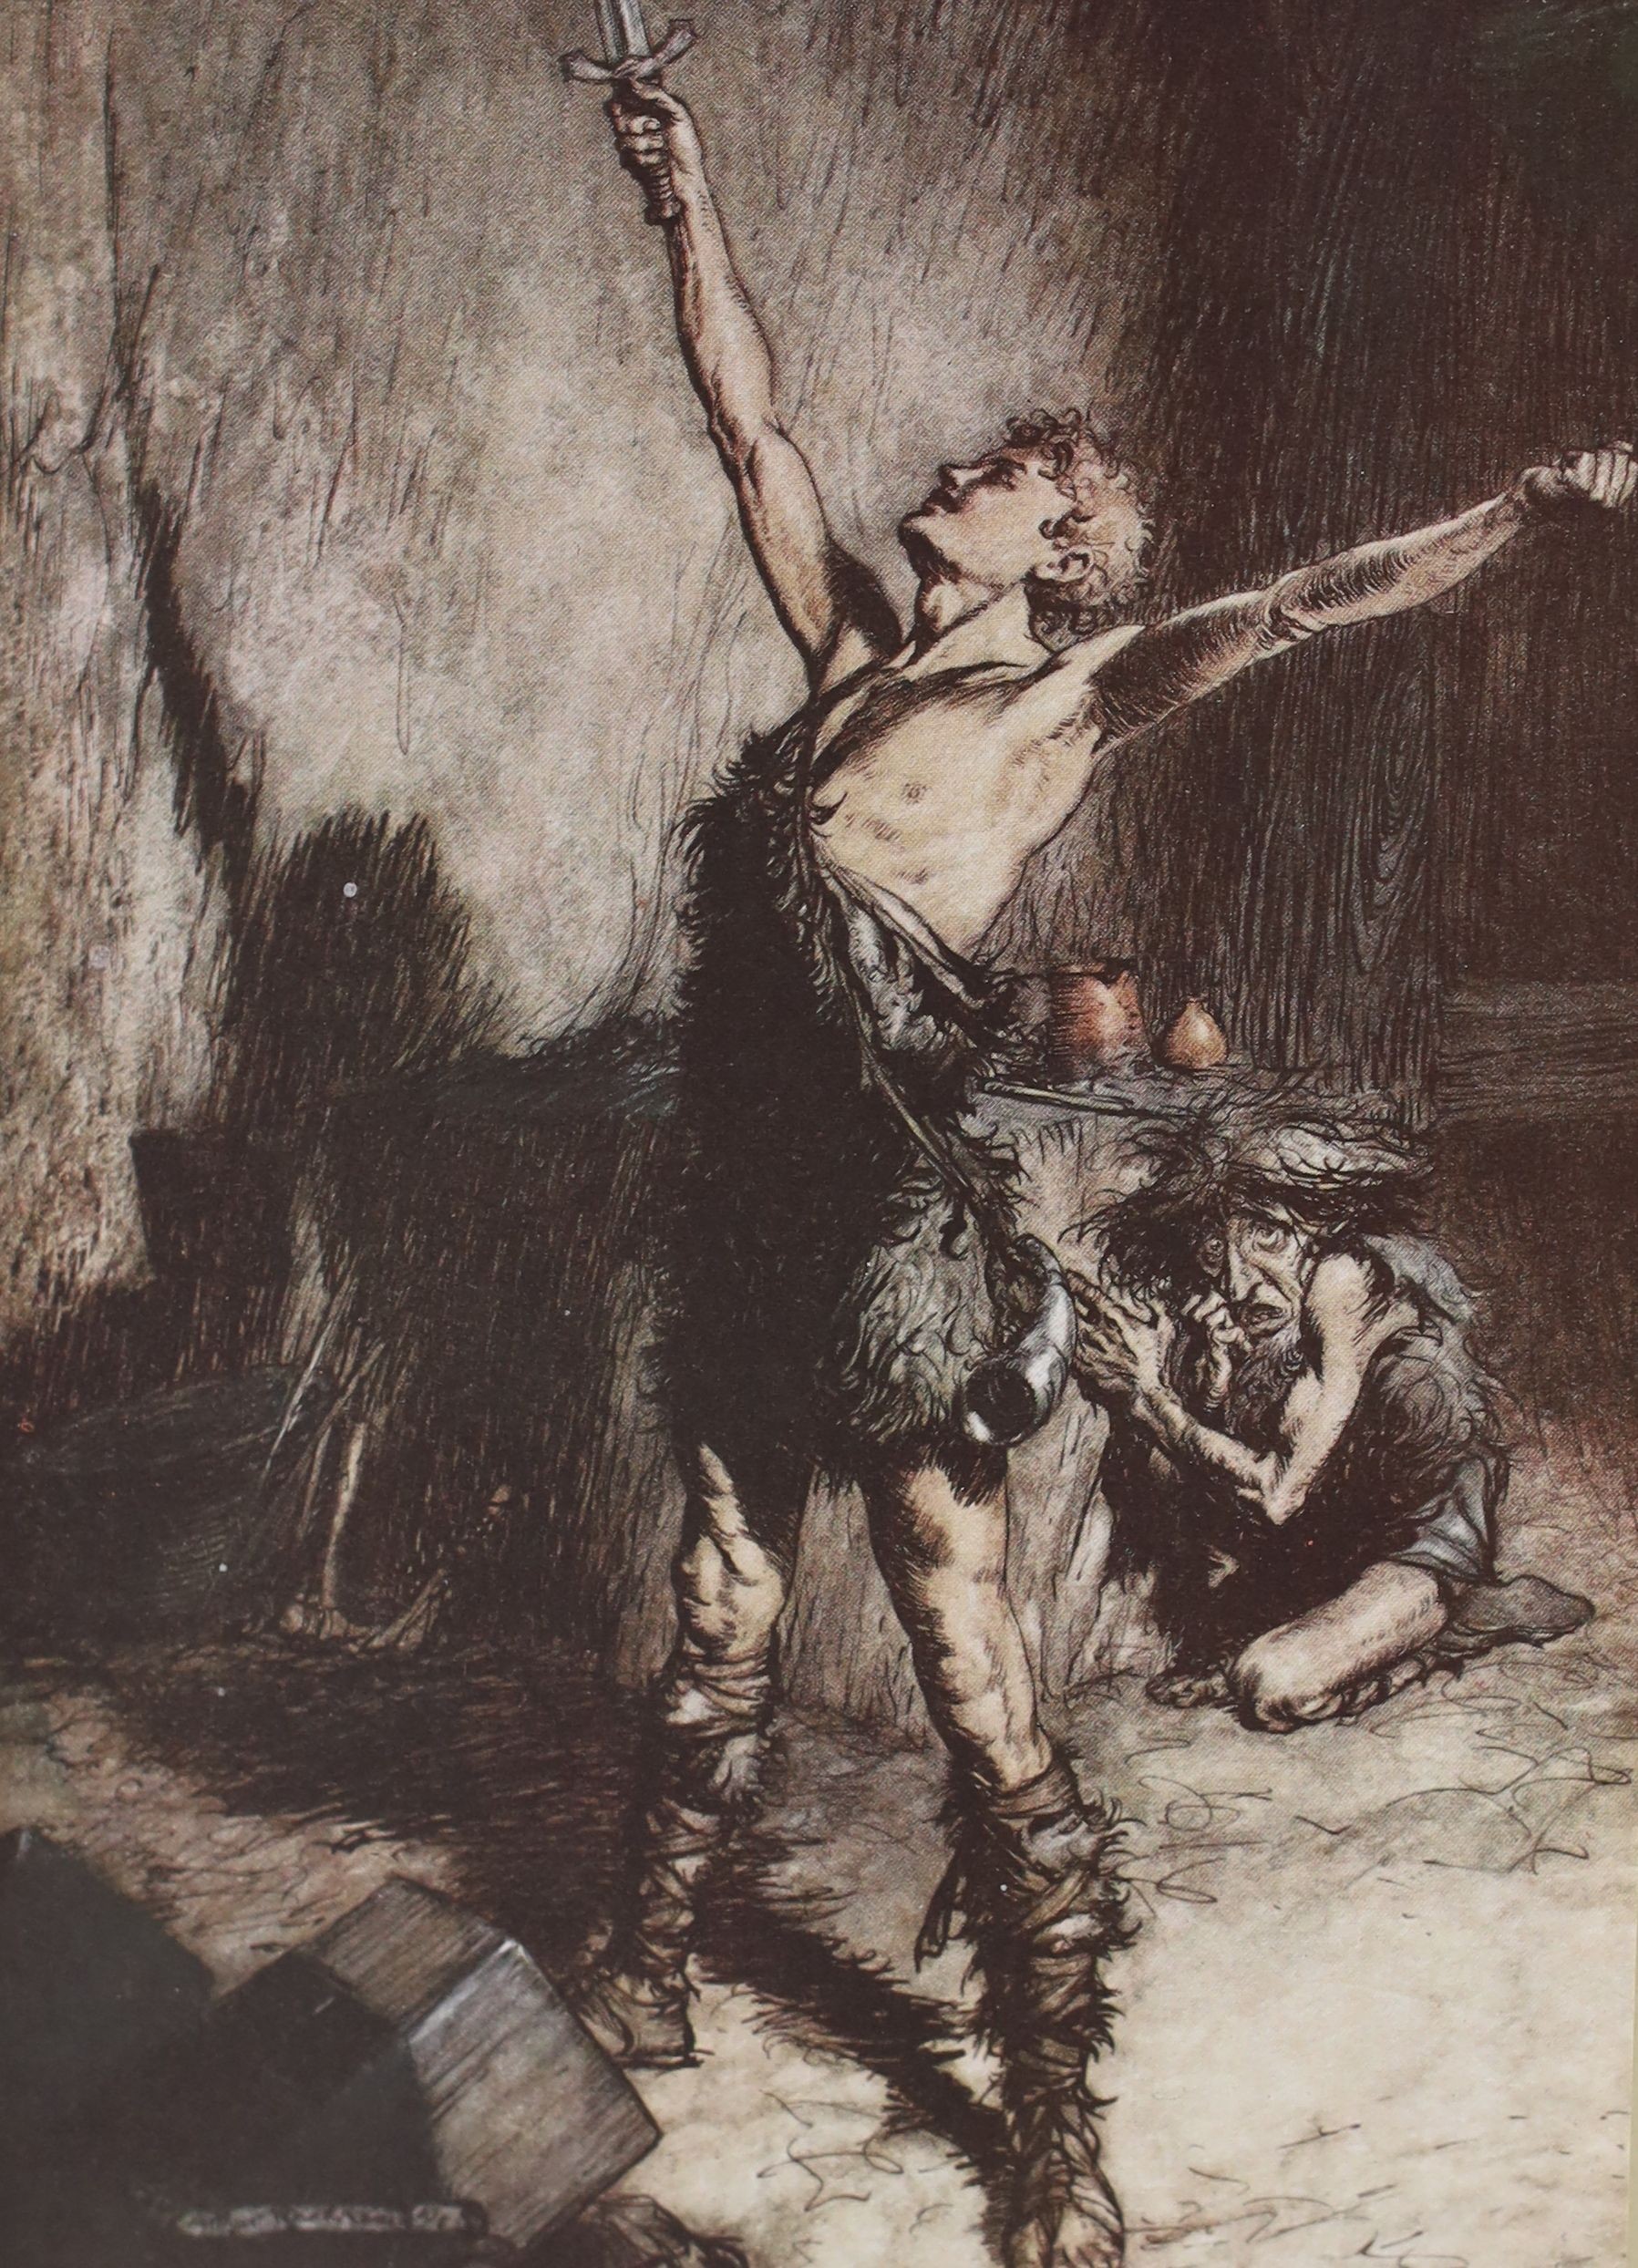 Wagner, Richard - The Ring of the Niblung, first 2 vol. set, Siegfried and the Twilight of the Gods, illustrated by Arthur Rackham, translated by Margaret Armour, with 30 tipped-in colour plates, William Heinemann, Londo